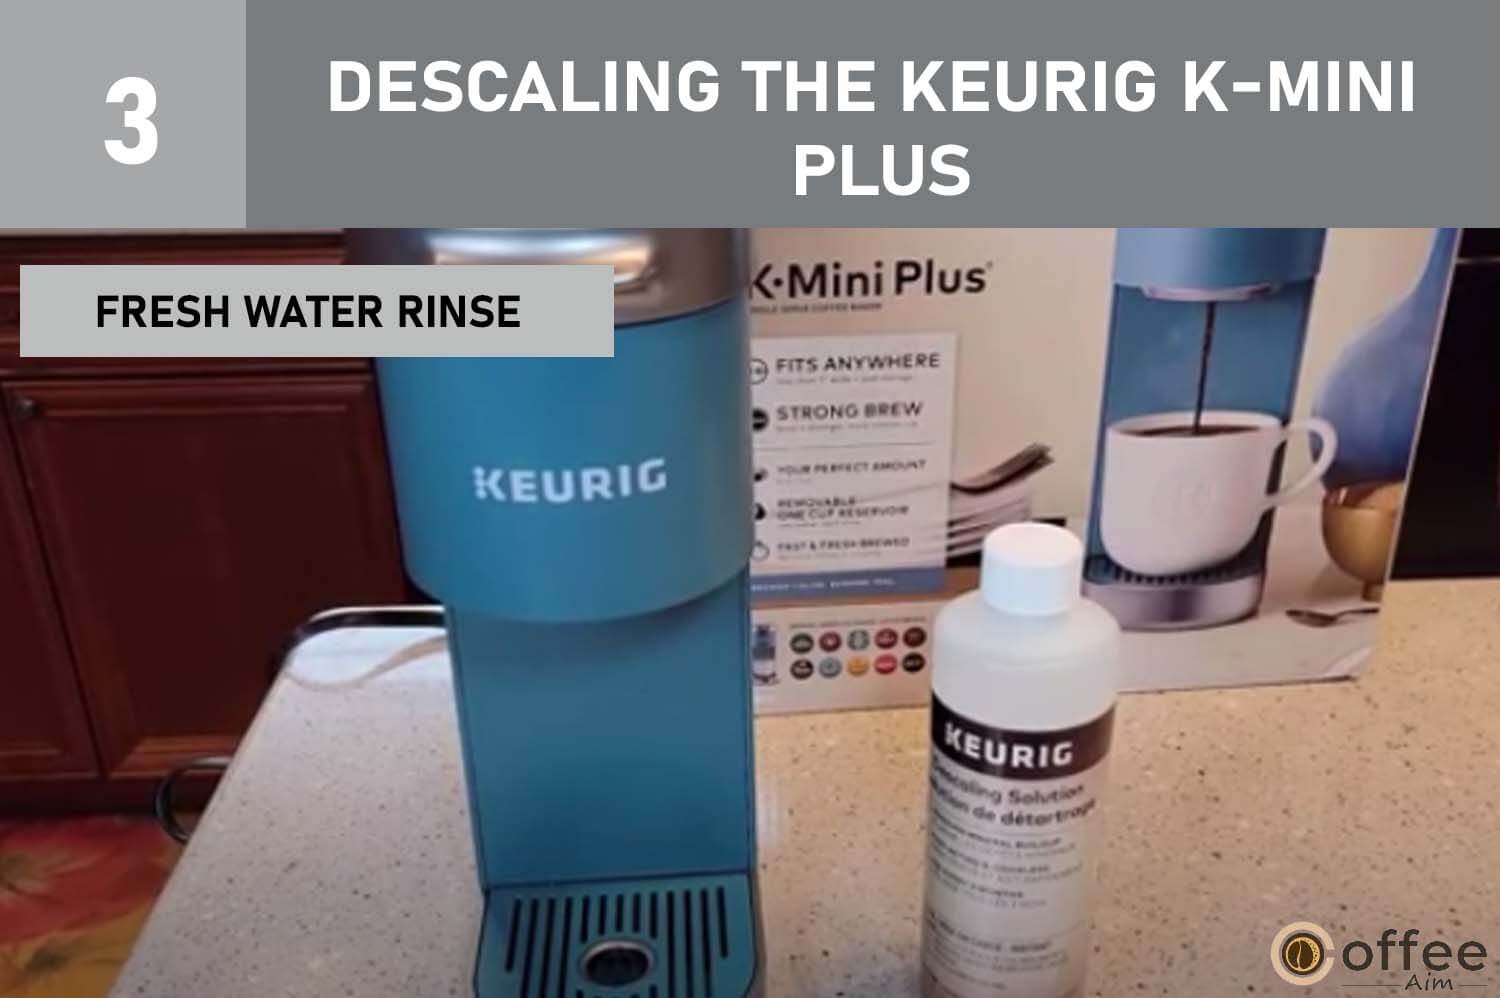 This image describes the "fresh water"of desclaing the keurige k-mini plus for the article "How to use keurig k-mini plus"